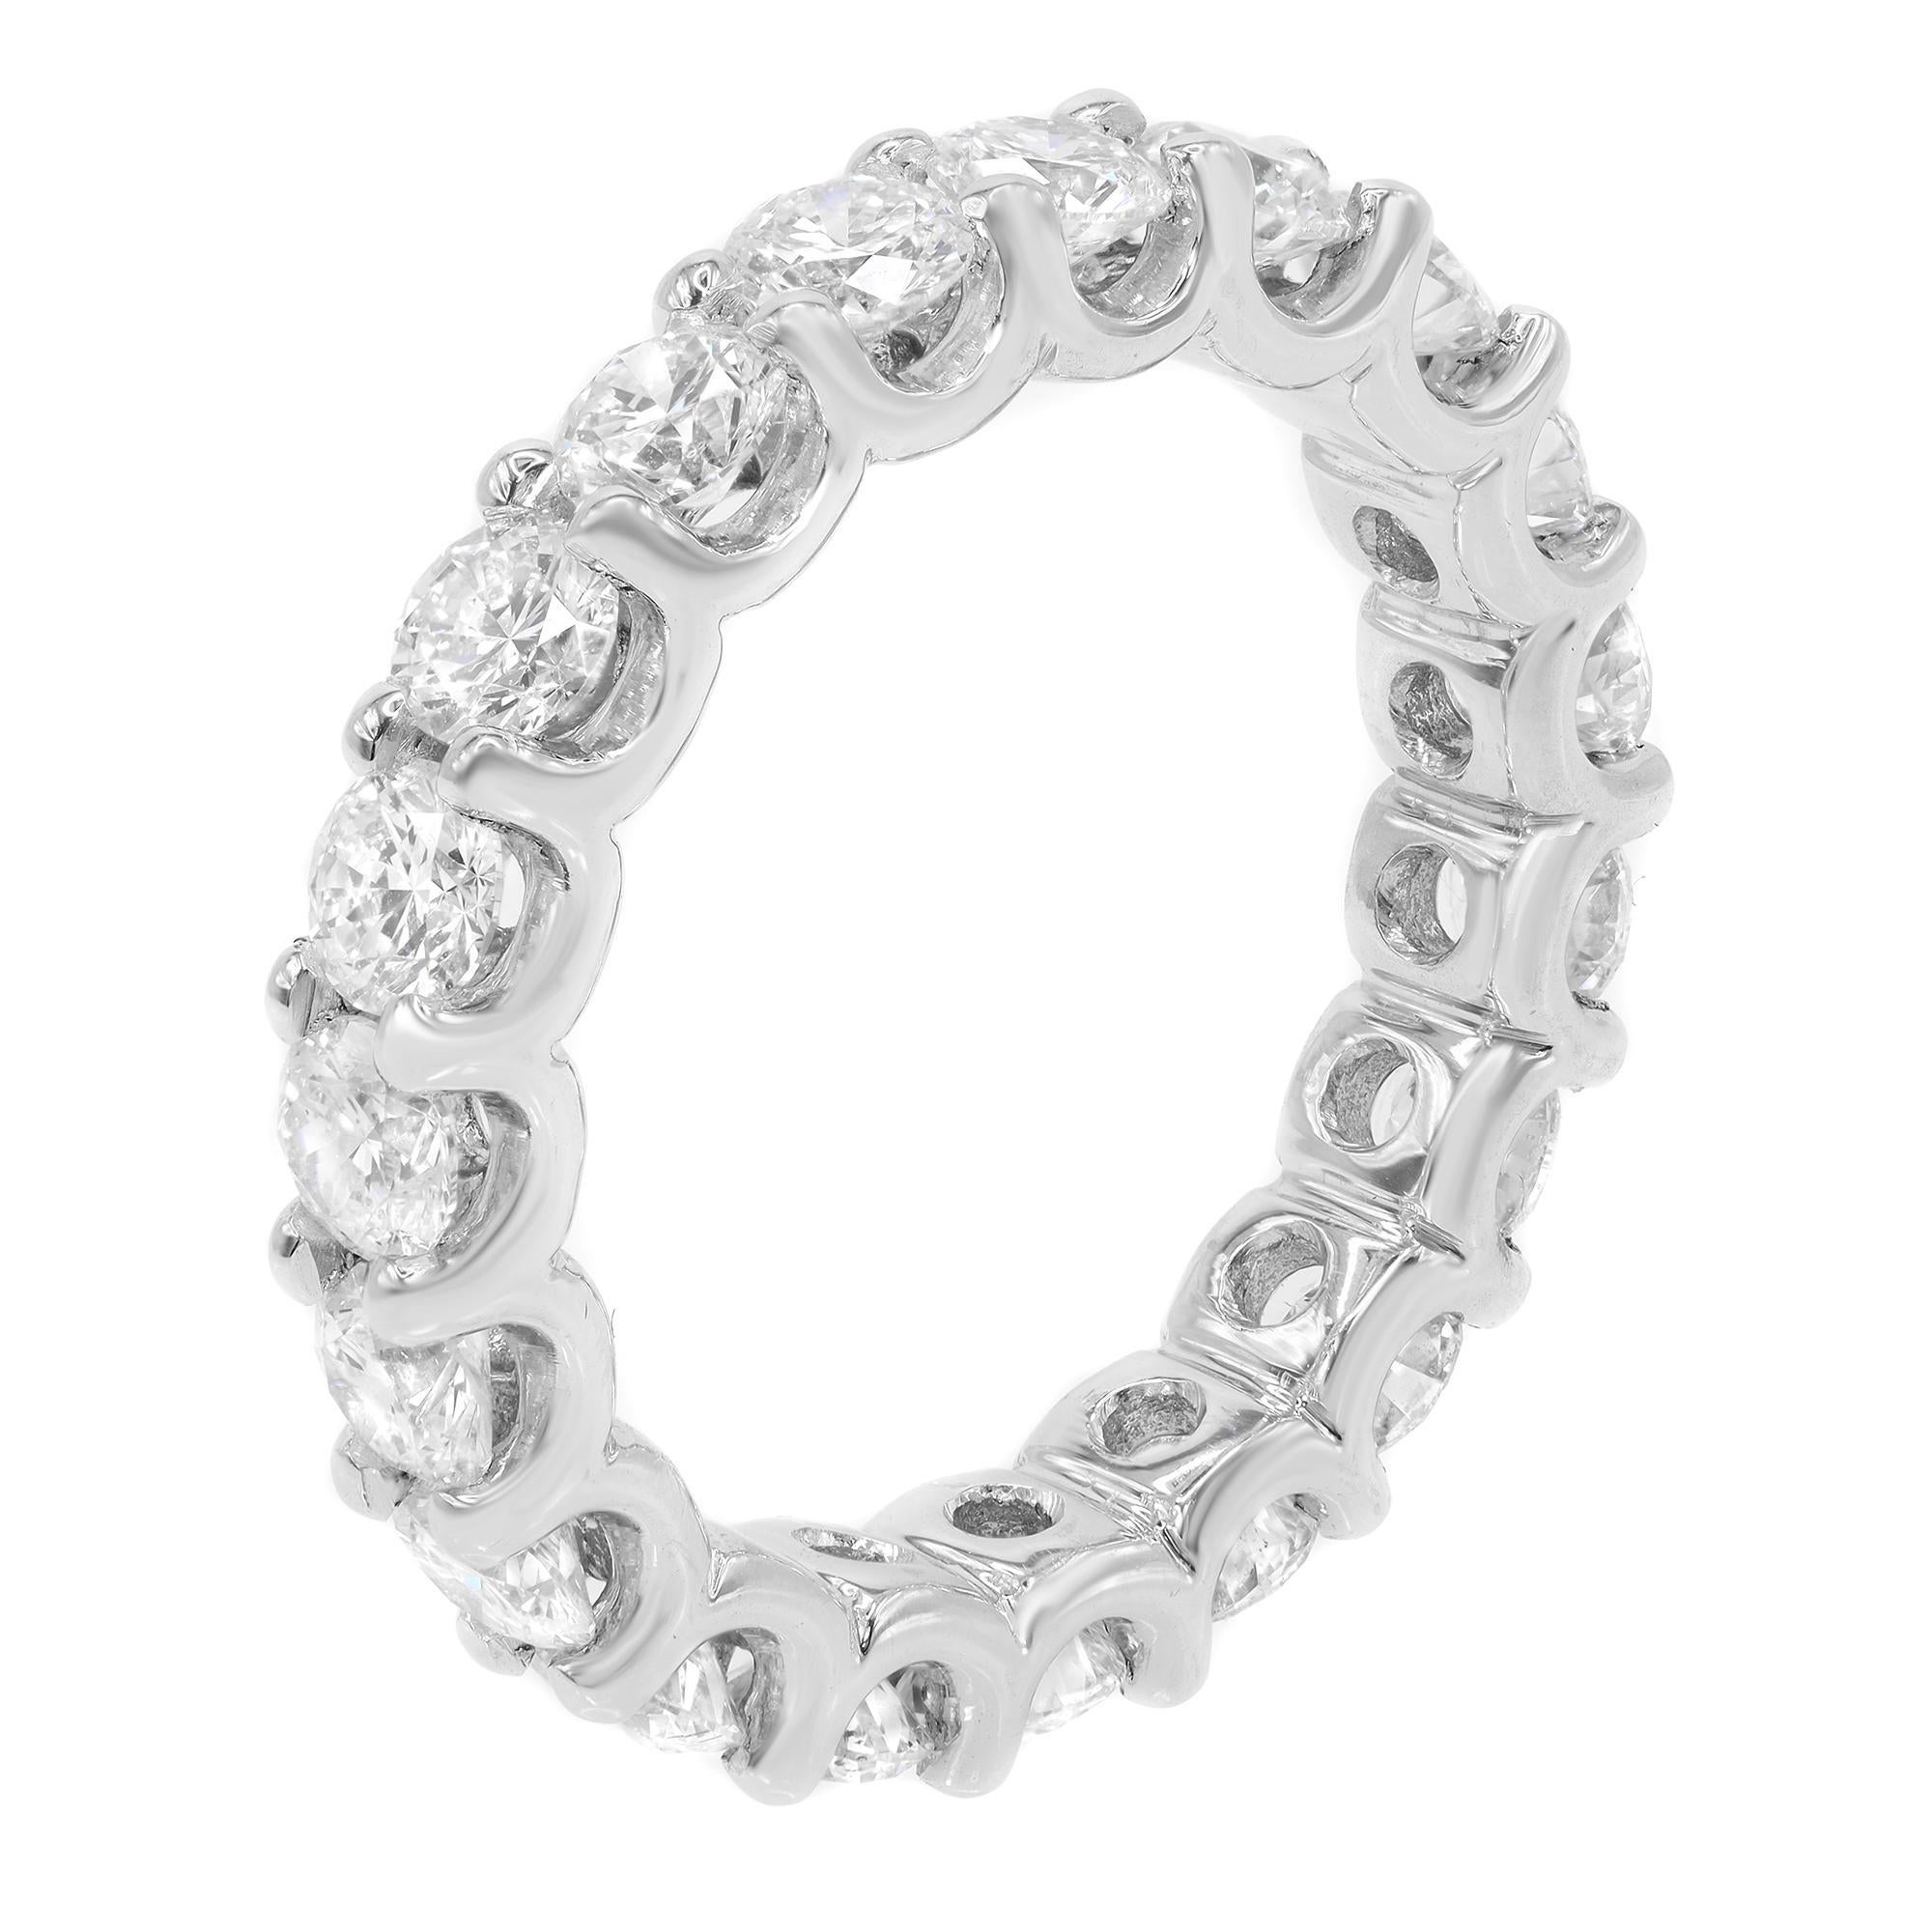 Rachel Koen Round Cut Diamond Eternity Wedding Band Ring 18K White Gold 2.89cttw In New Condition For Sale In New York, NY